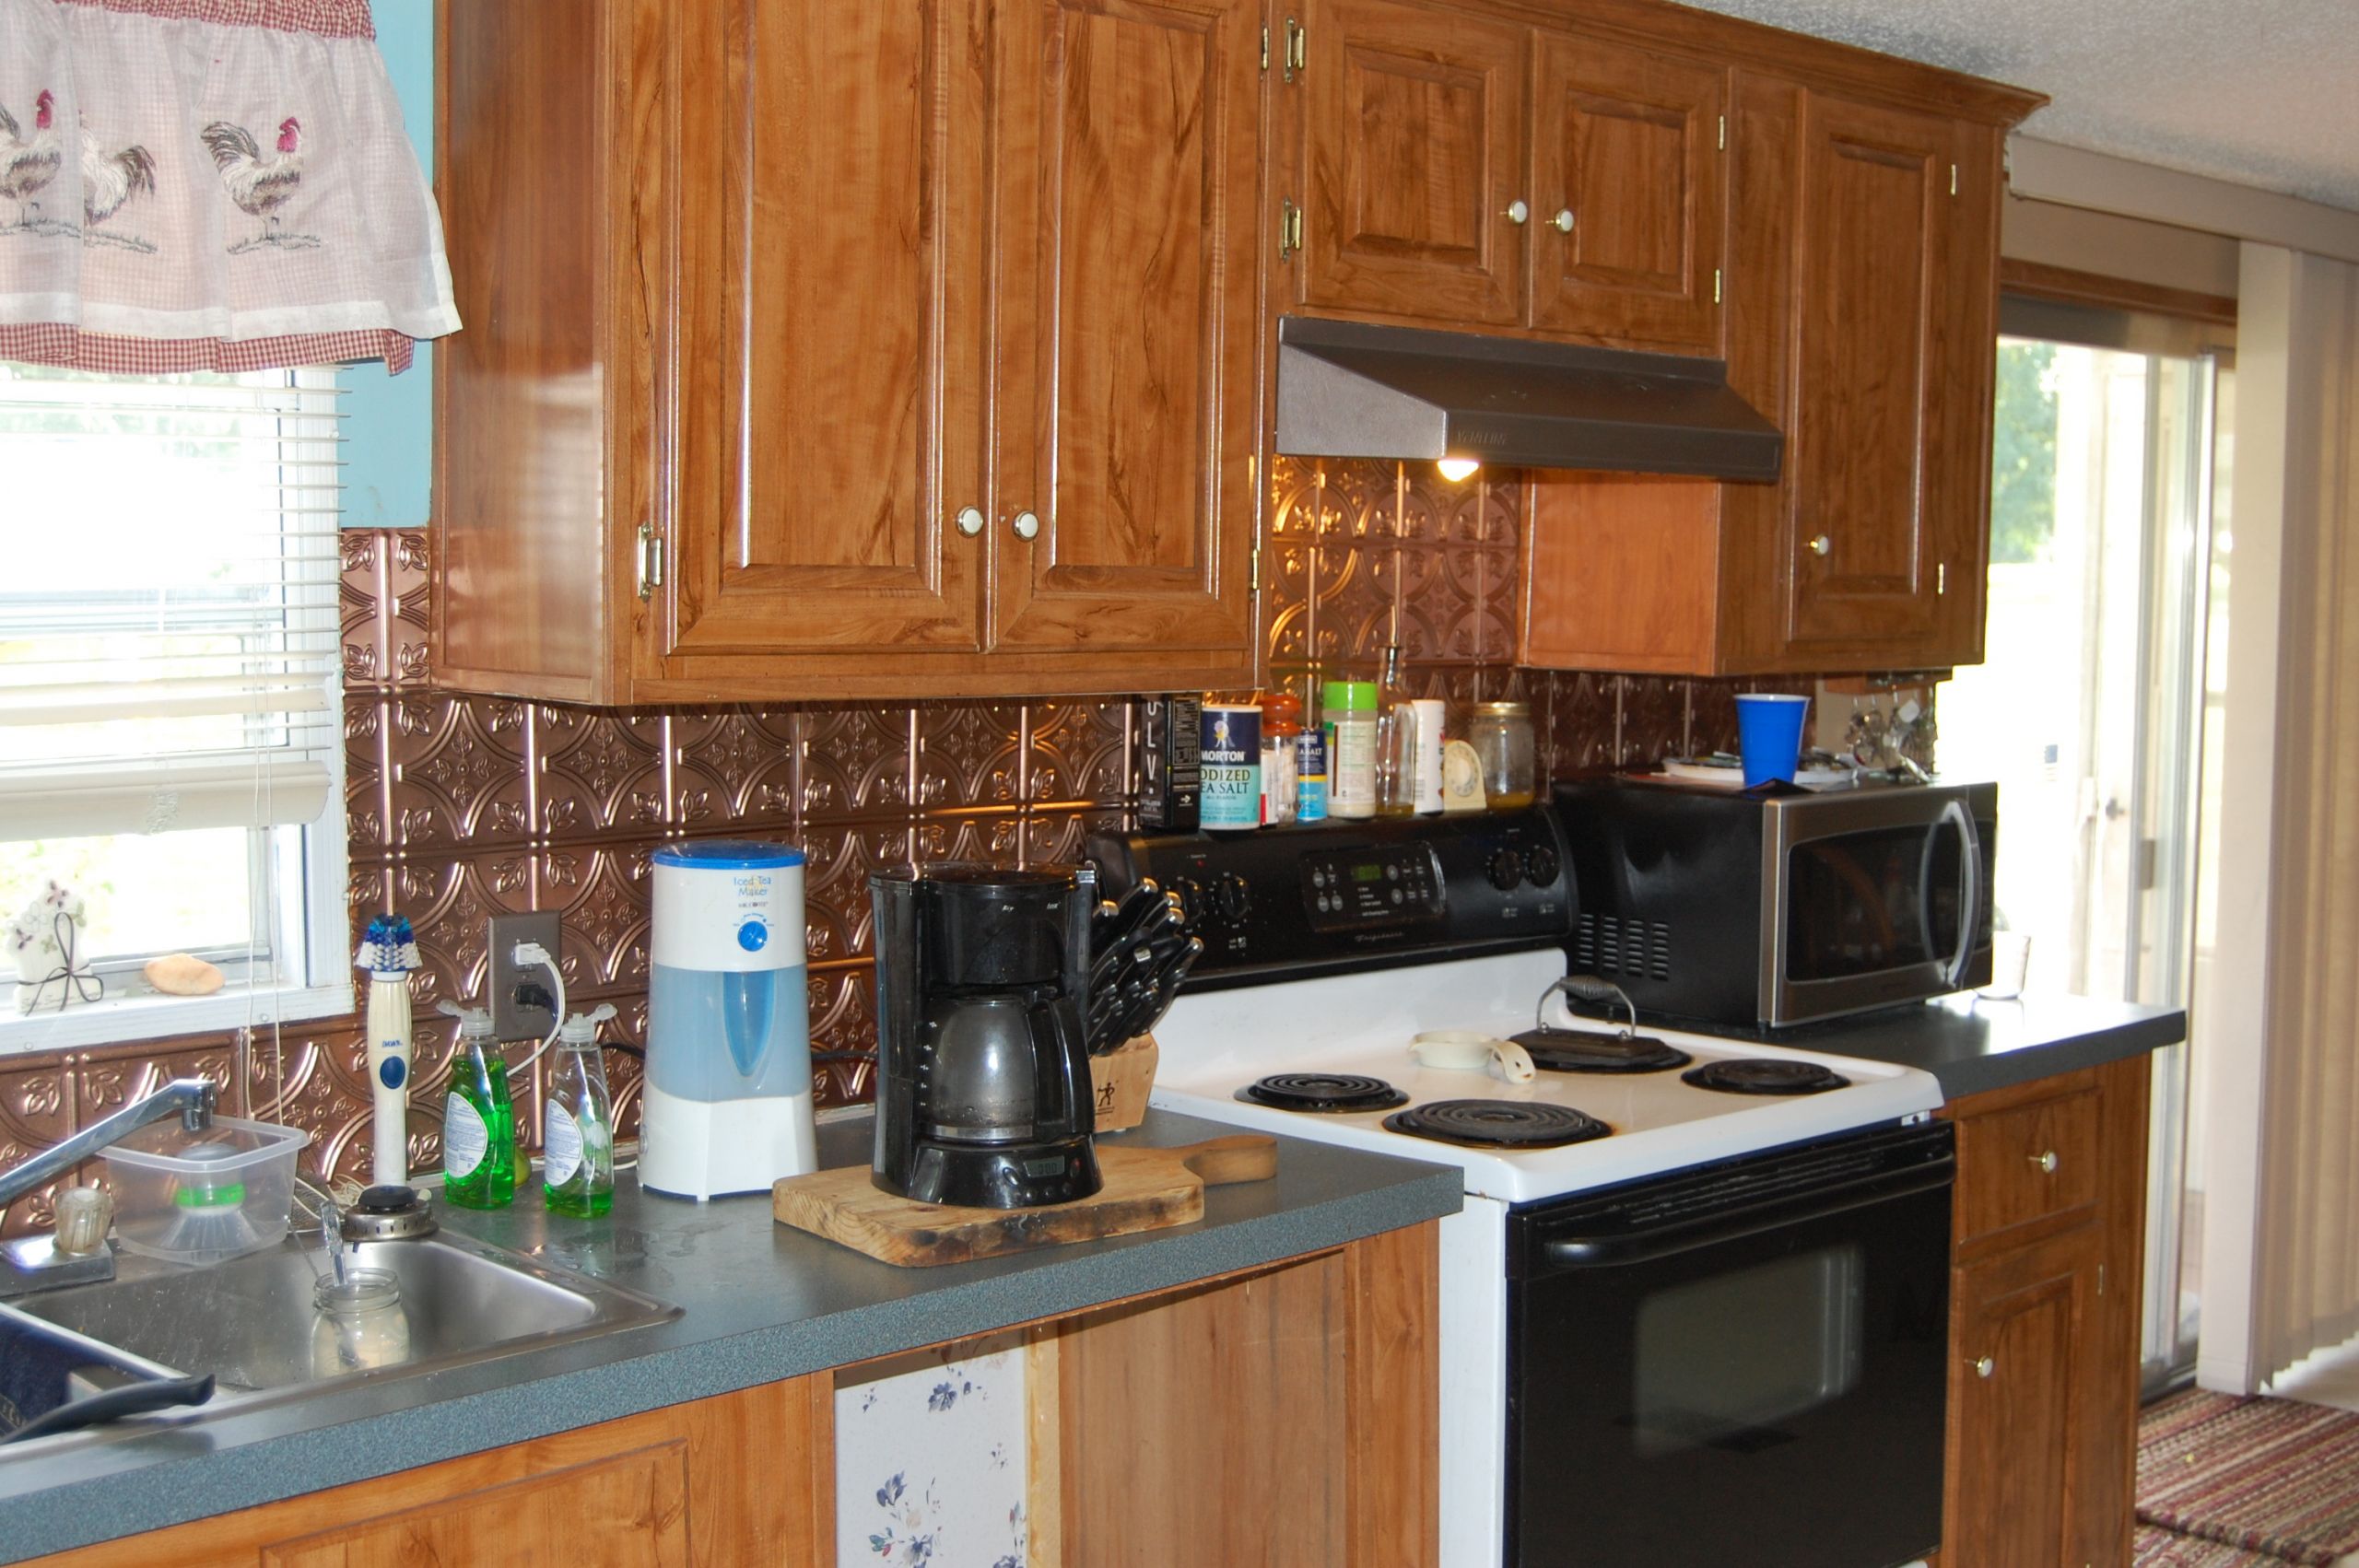 Remodeled Mobile Home Kitchen
 Mobile Home Kitchen Remodel Birch Cabinets